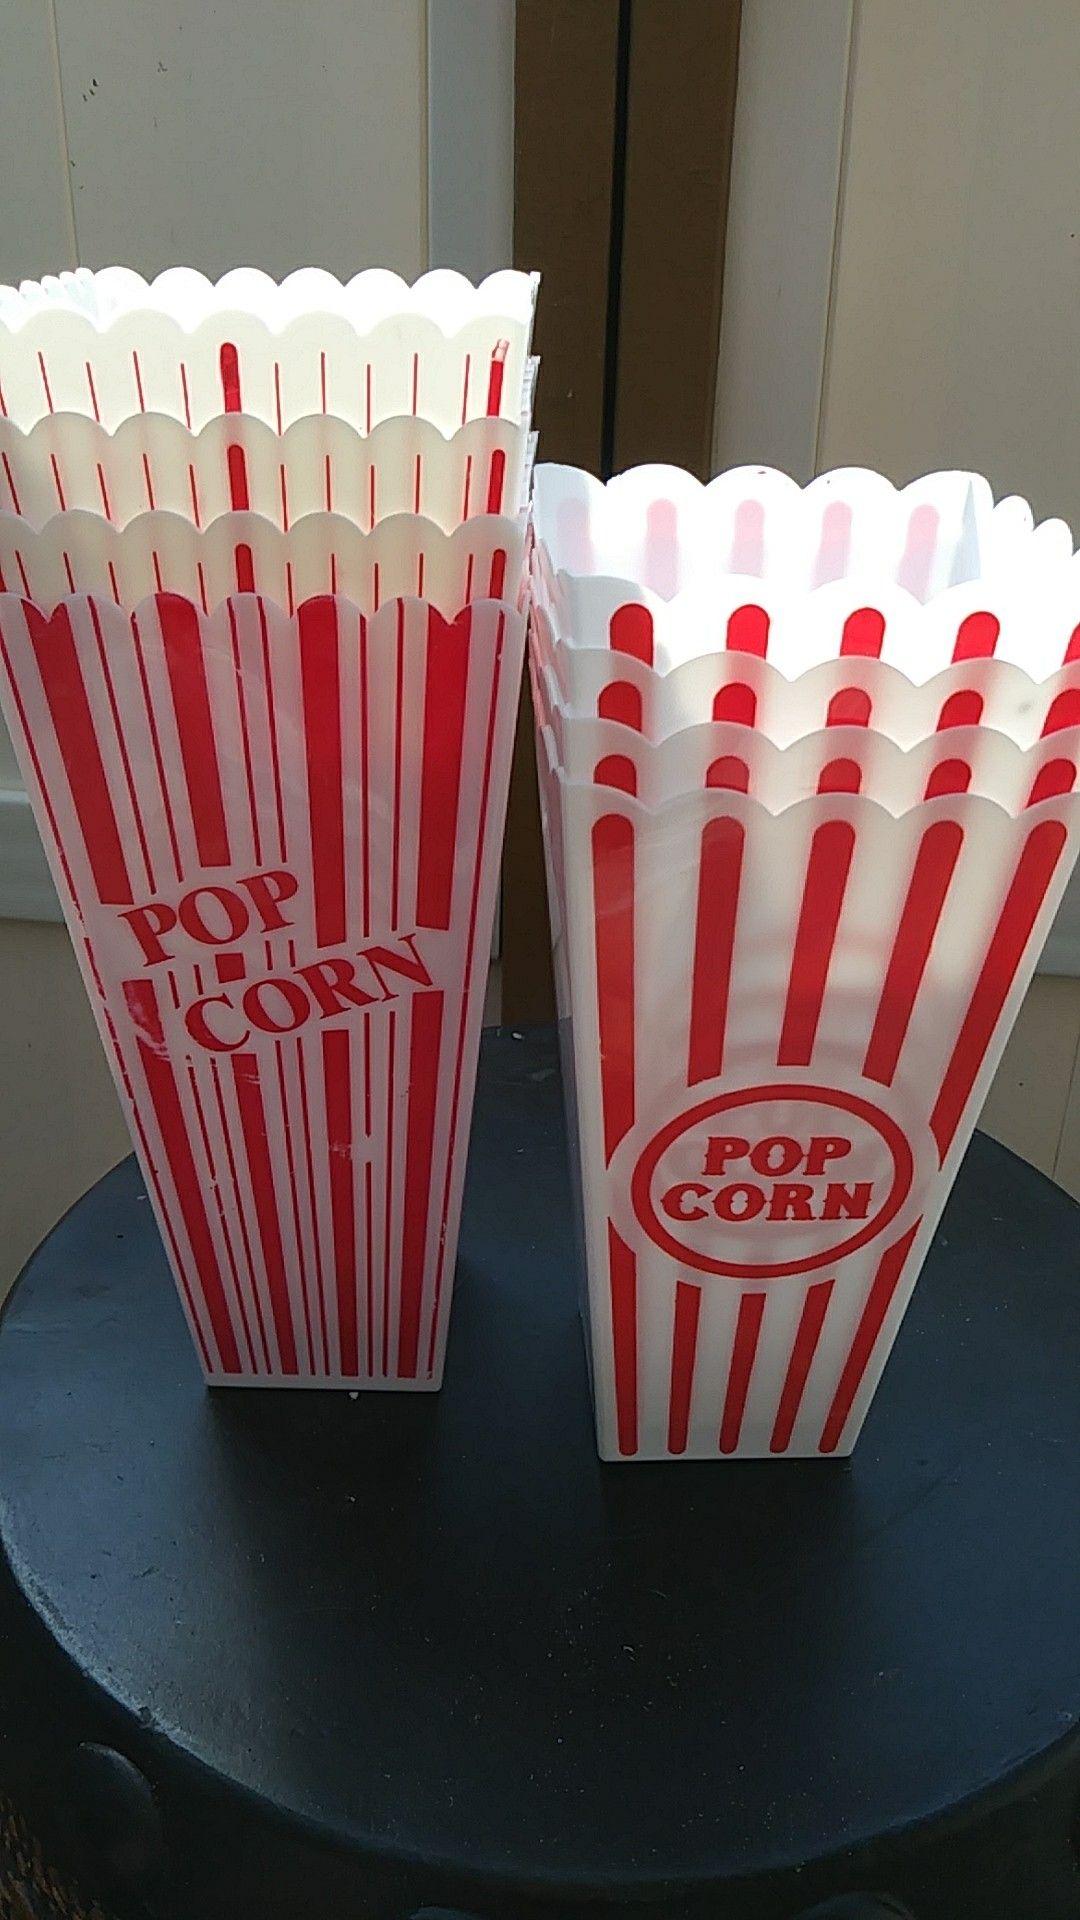 Popcorn containers